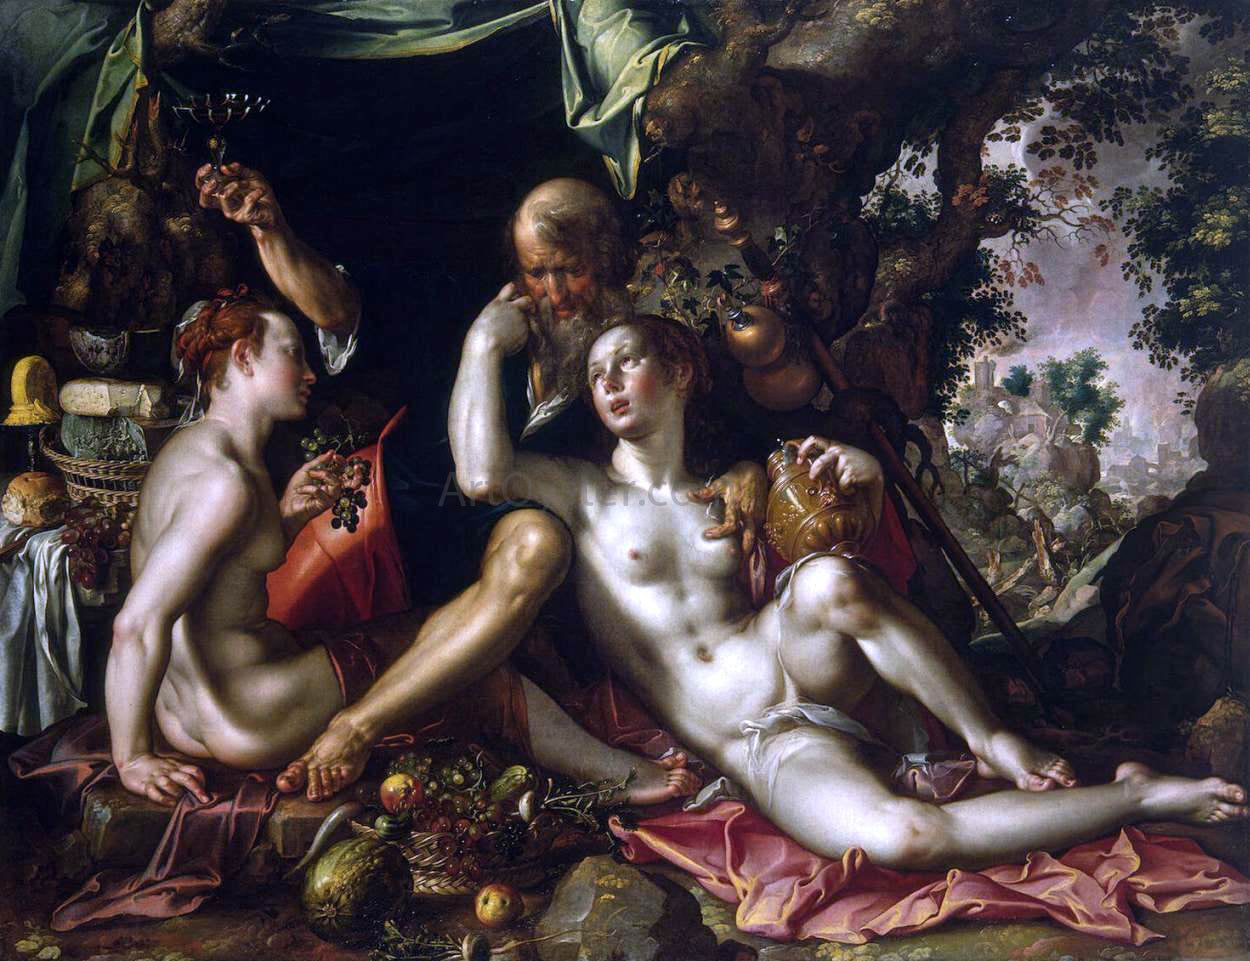  Joachim Wtewael Lot and his Daughters - Hand Painted Oil Painting